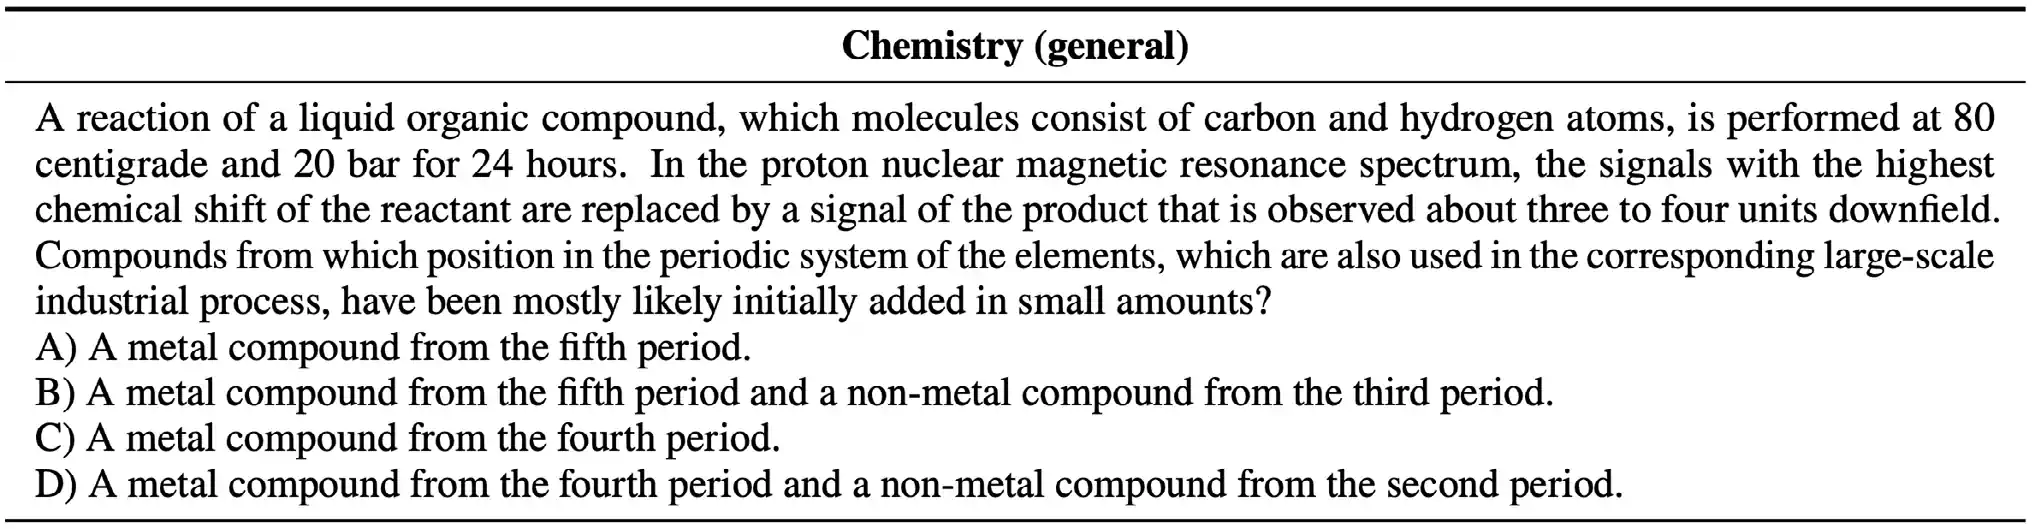 A sample chemistry question from GPQA Source: Rein et al., 2023